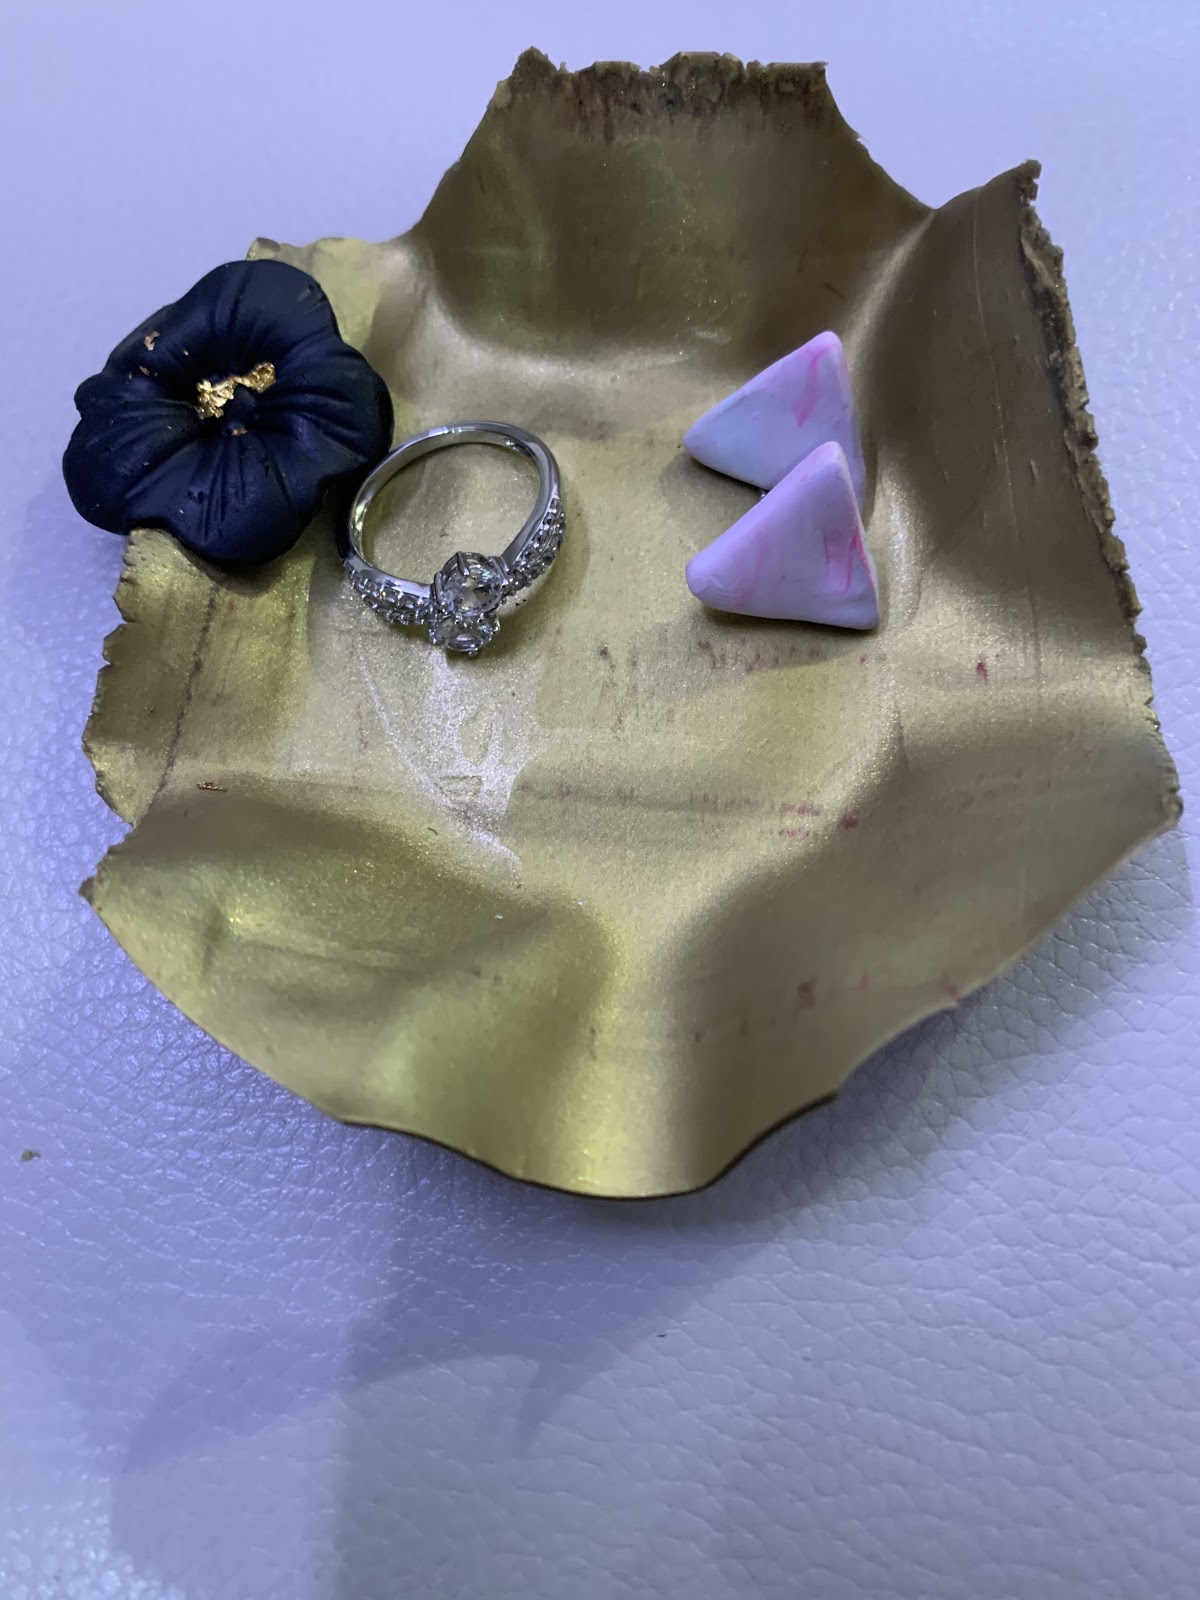 Gold trinket bowl with two lavender colored triangular stud earrings, a diamond wring and a purple daffodil